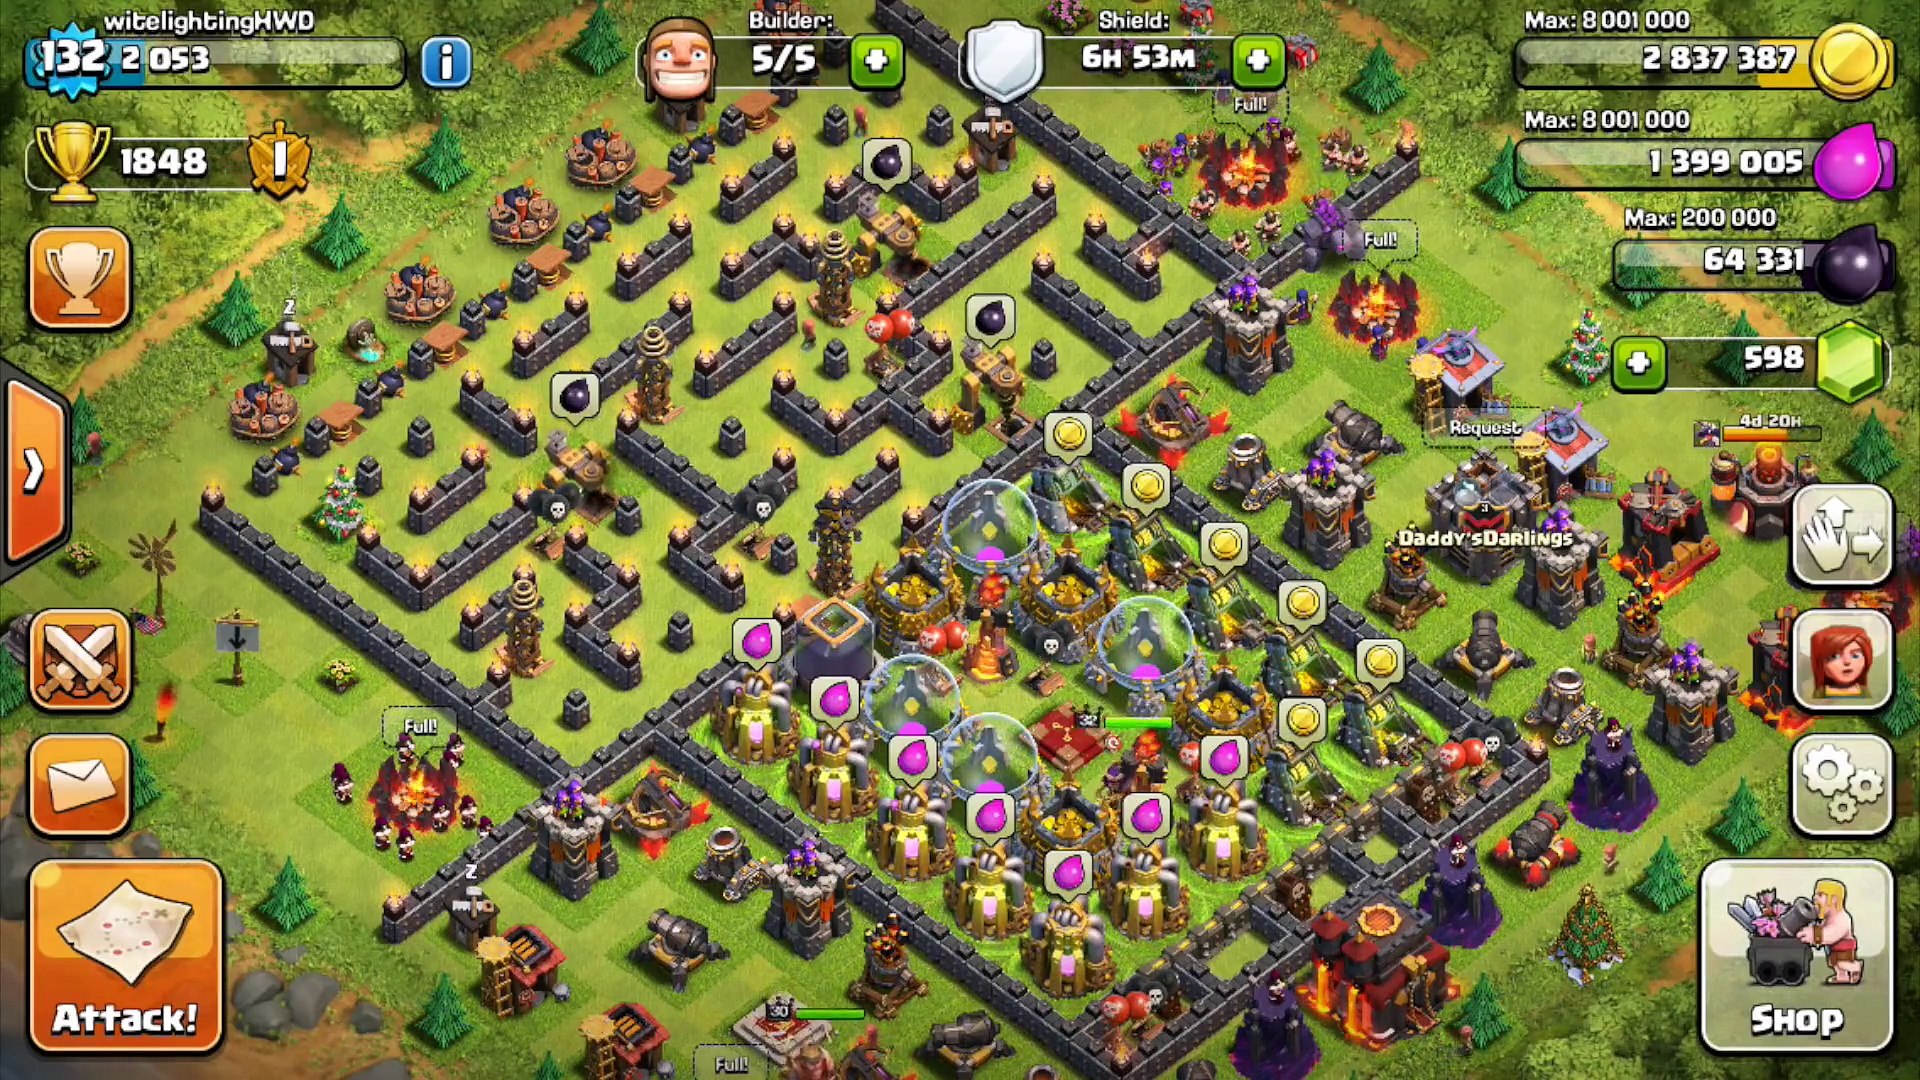 THE MAZE BASE! - Clash of Clans - WEIRD TROLL BASE! Trolling Noobs in the  Maze! - video Dailymotion